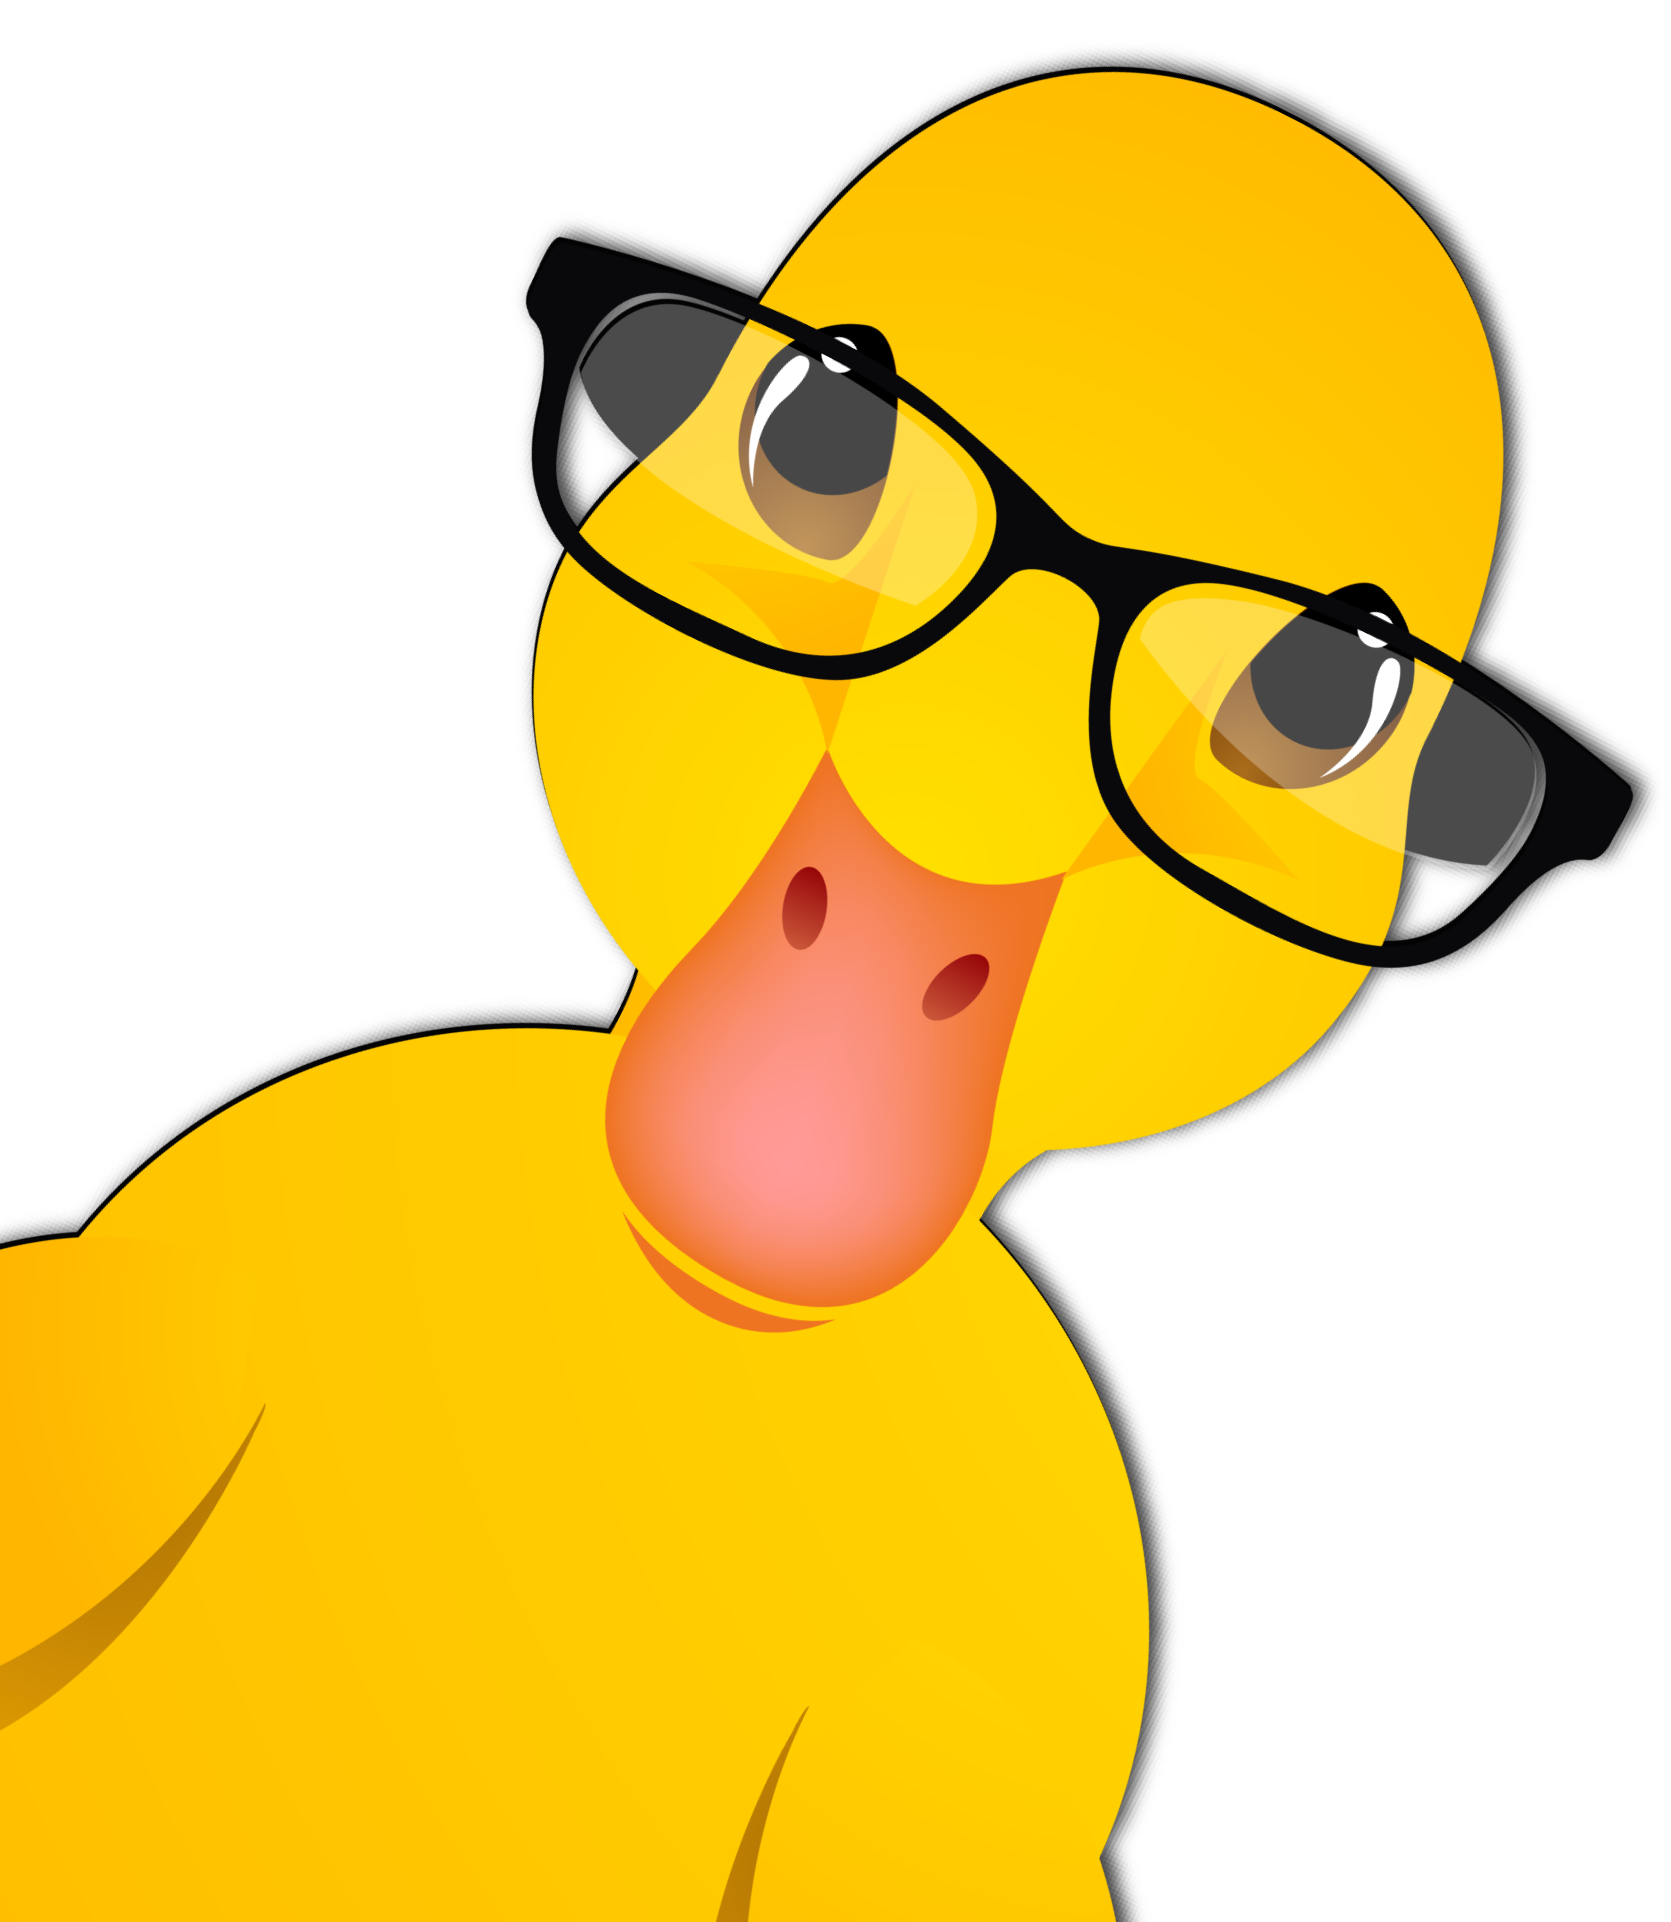 Clipart duck realistic. Duckling yellow thing free